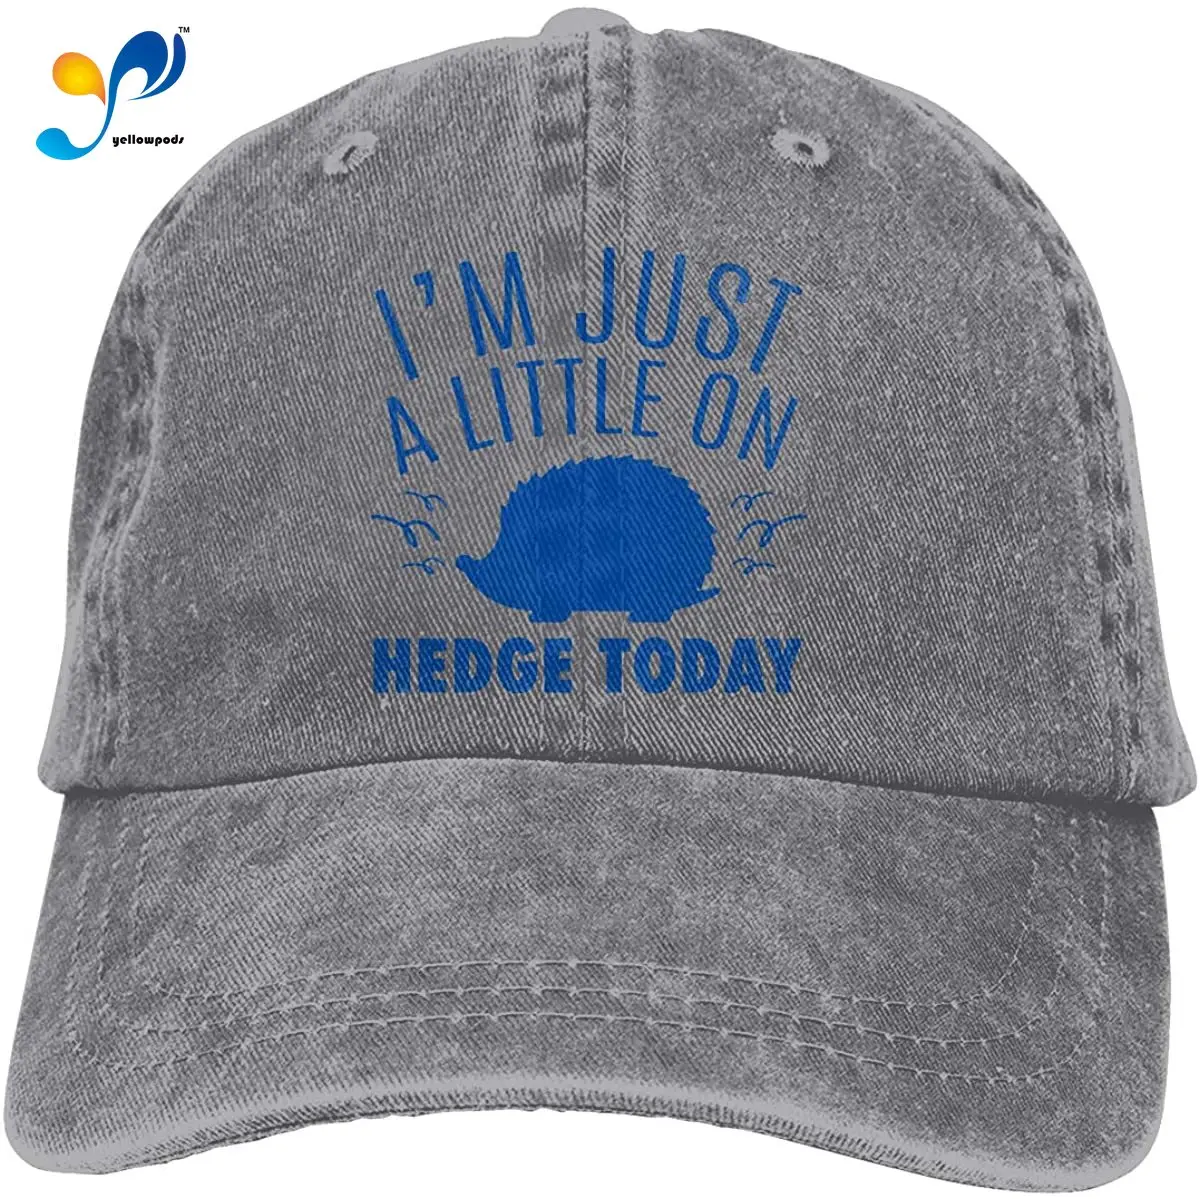 

I Am Just A Little Hedgehog A Vintage Washed Twill Baseball Caps Adjustable Hats Funny Humor Irony Graphics Of Adult Gift Gray